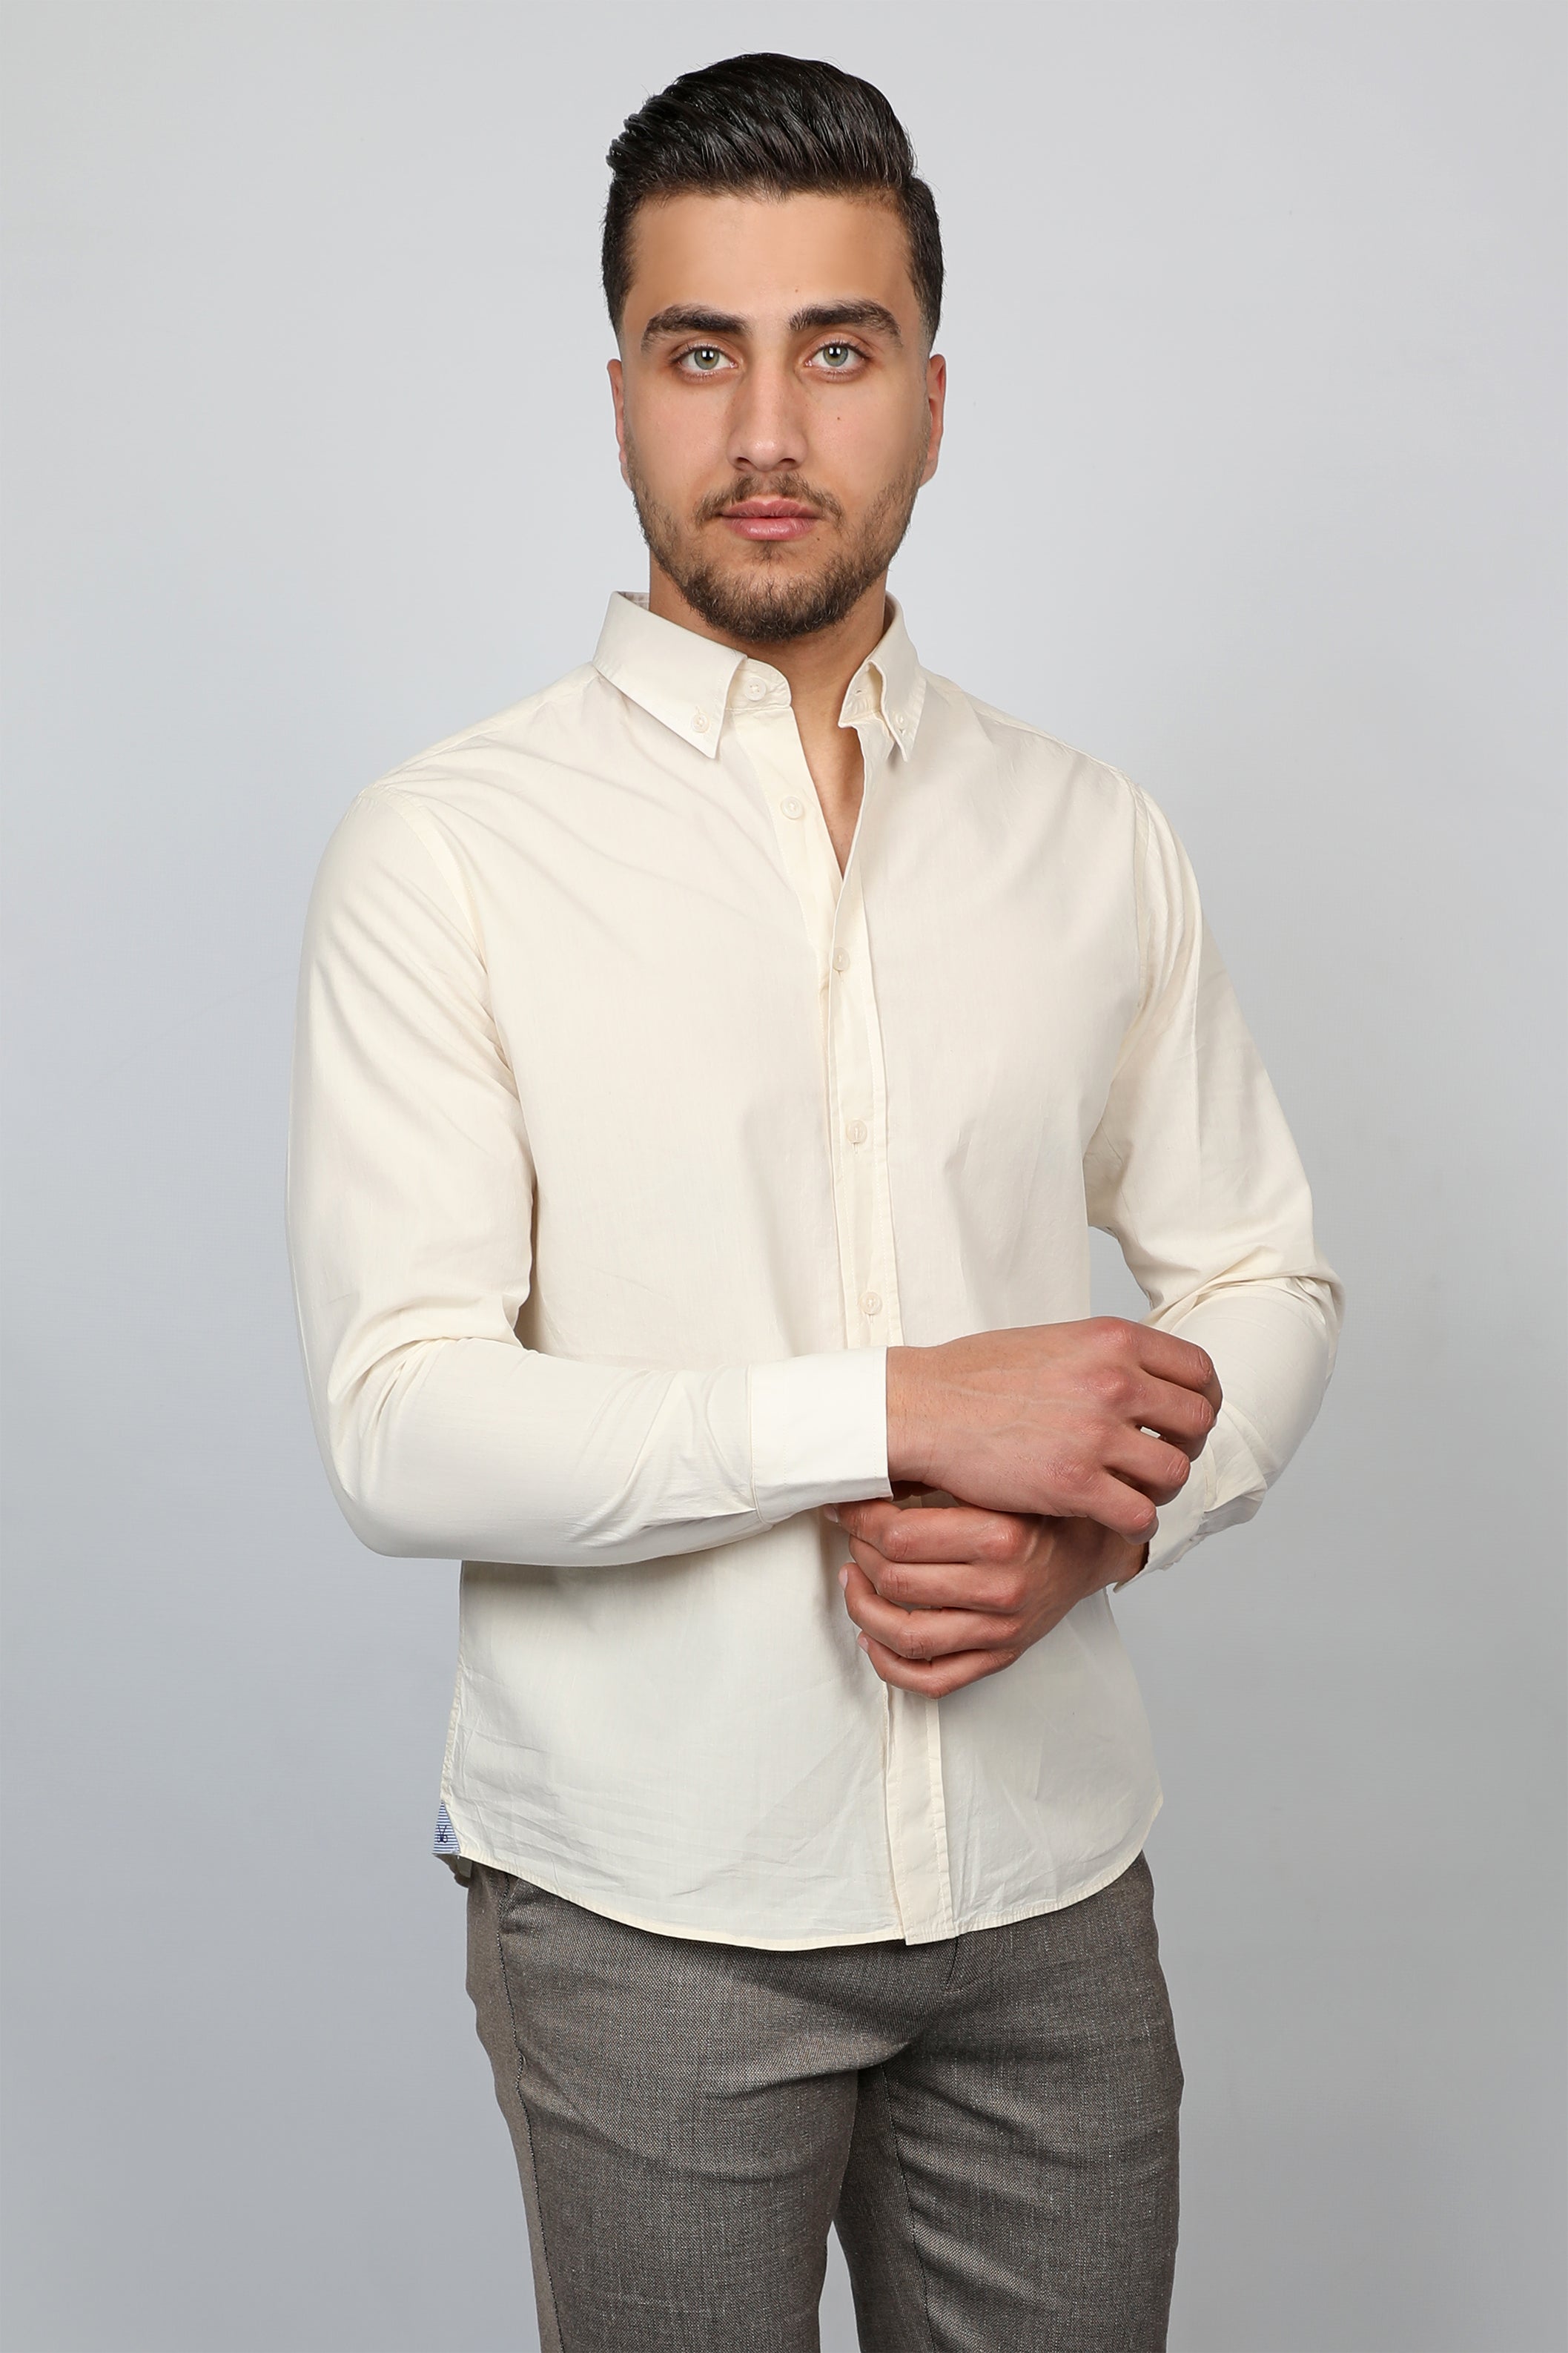 Beige Shirt With White Button